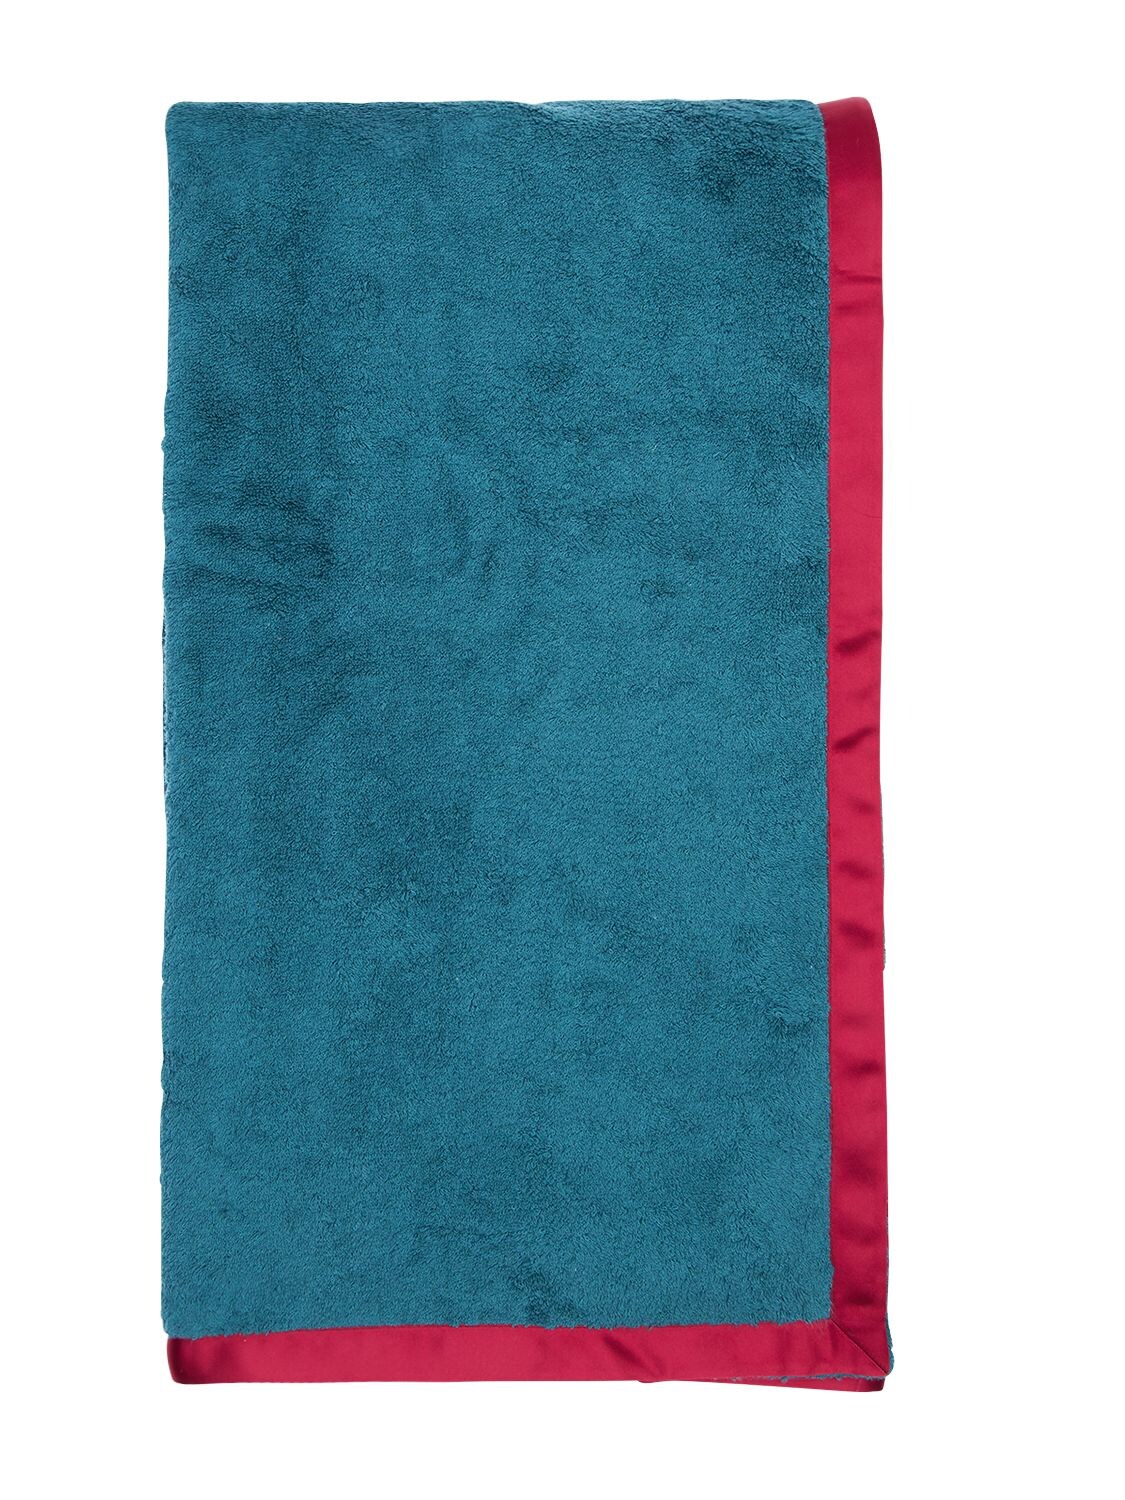 Alessandro Di Marco Cotton Terrycloth Bath Towel In Petrolblue,red